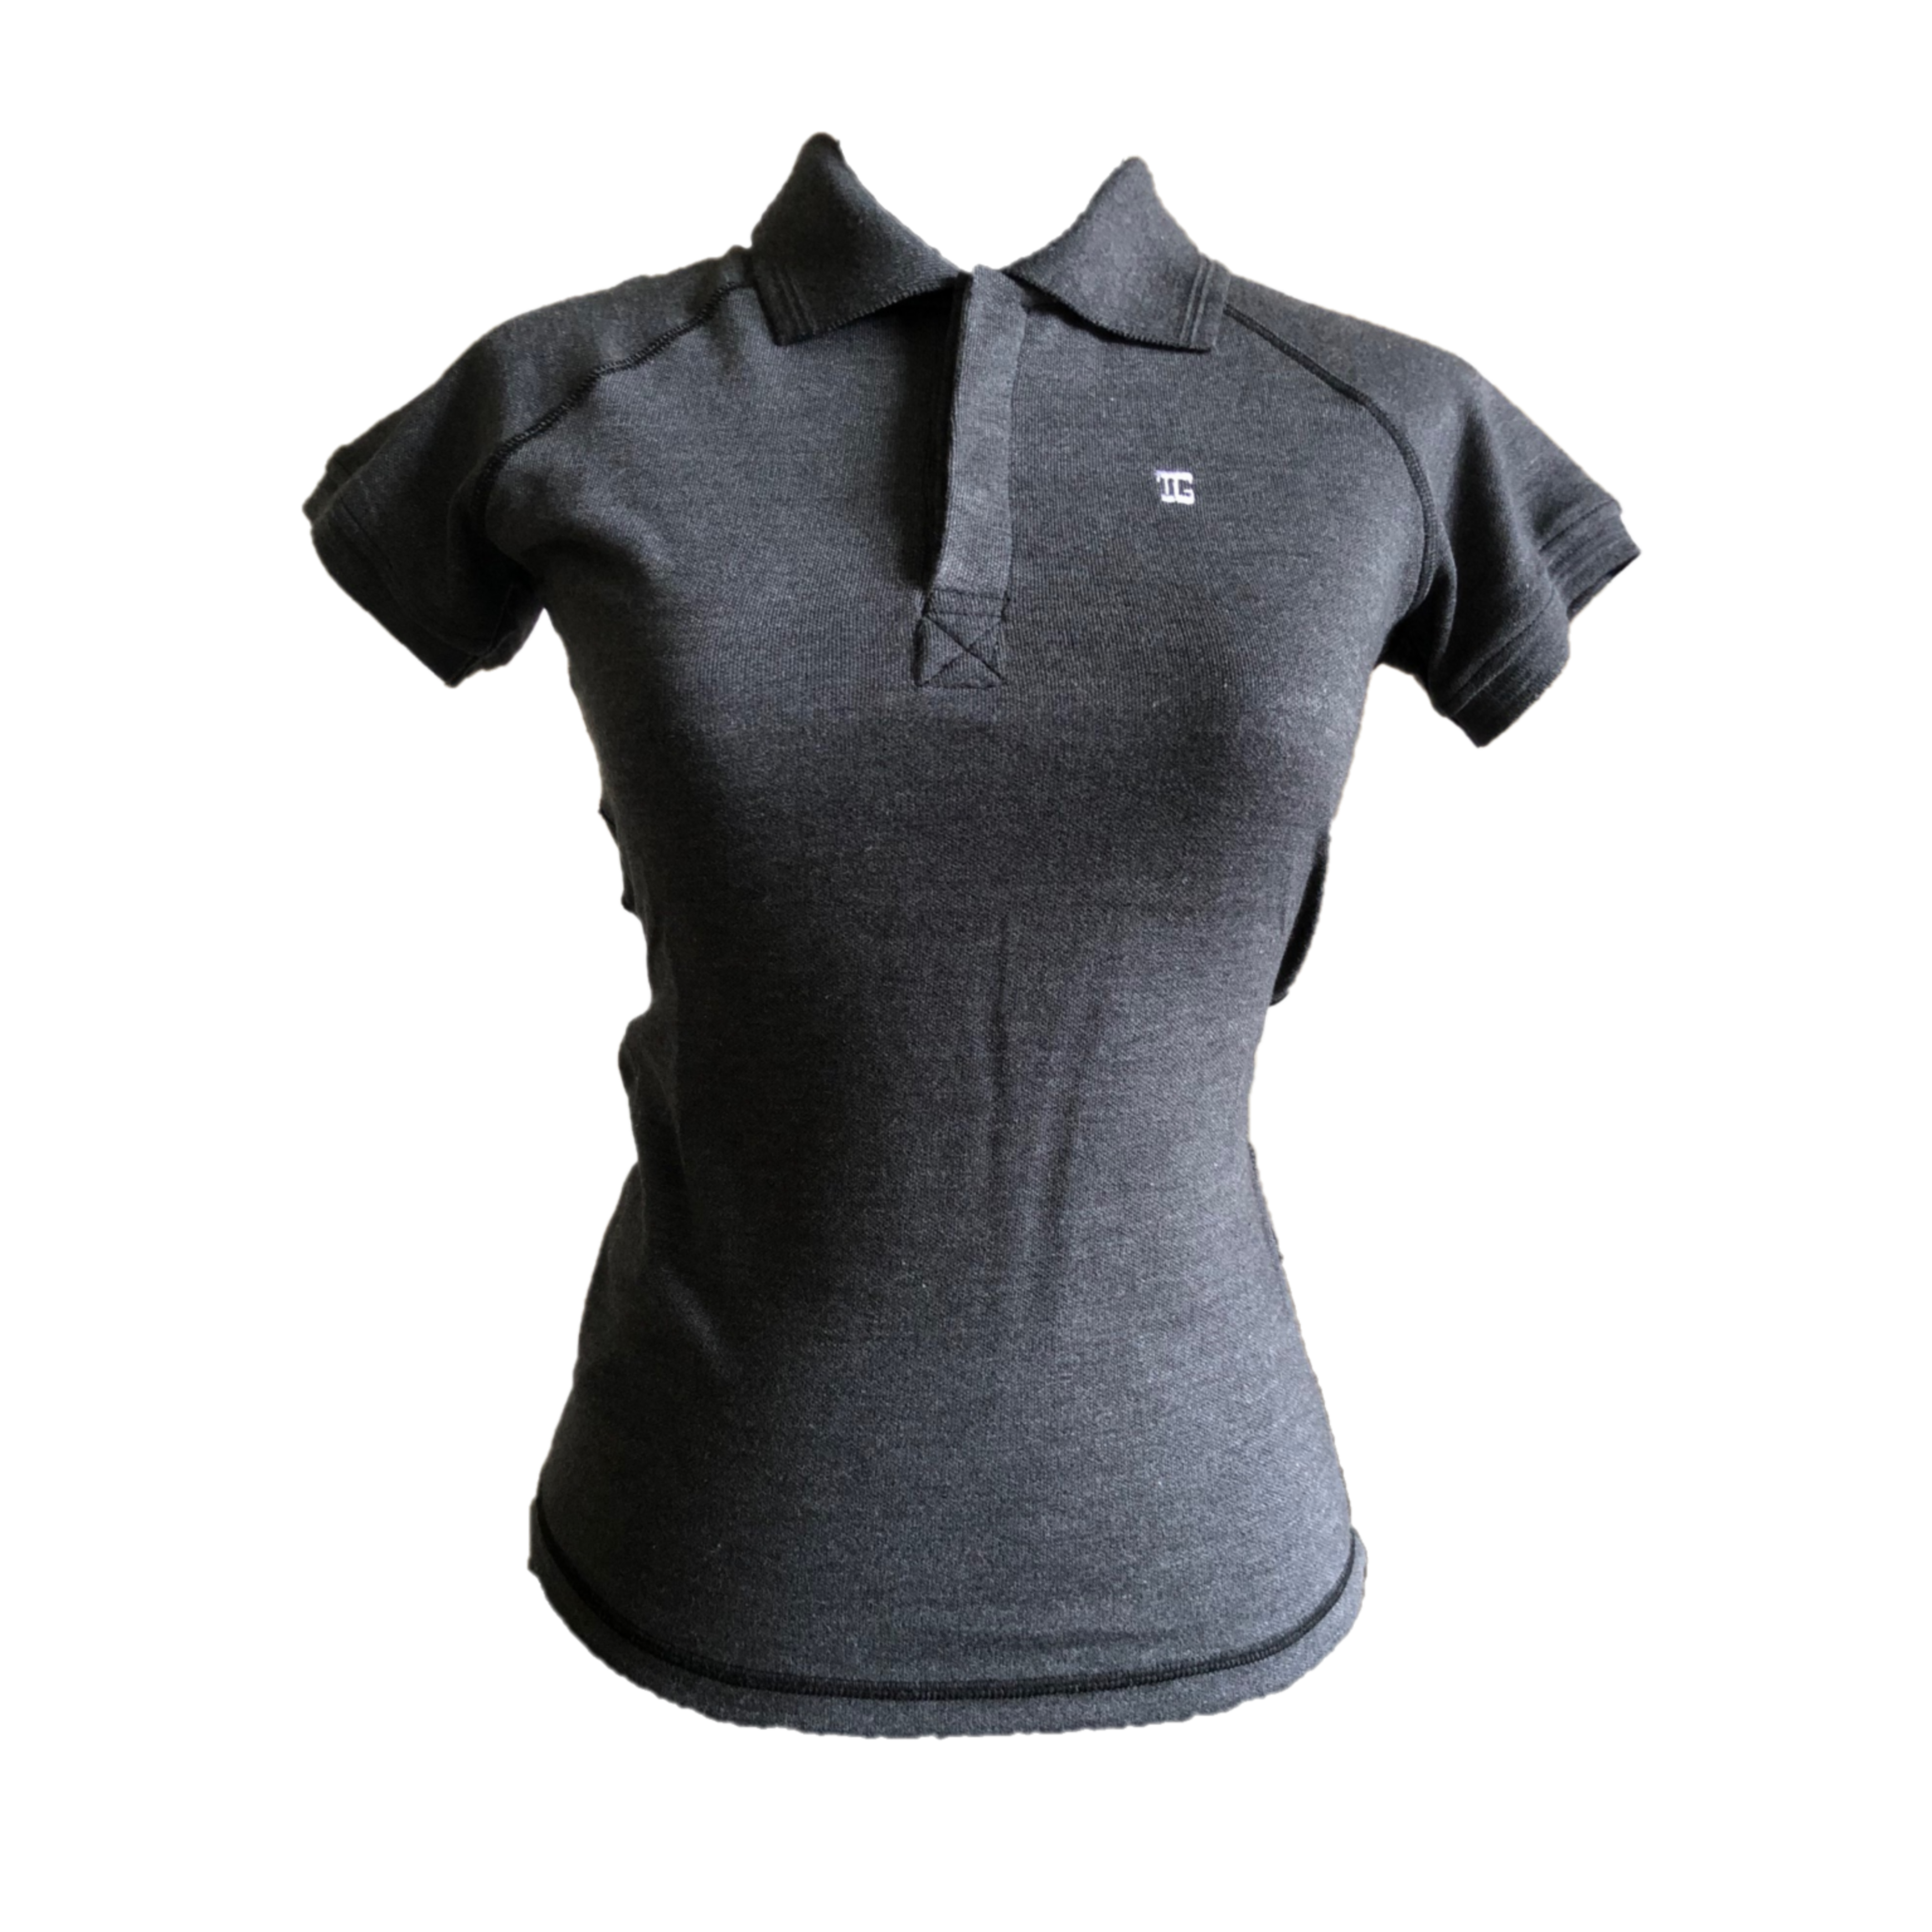 LT-108B || Ladies Top Long Raglan Sleeve Charcoal Grey Textured One Concealed Side Seam Pocket & Concealed Button Collar